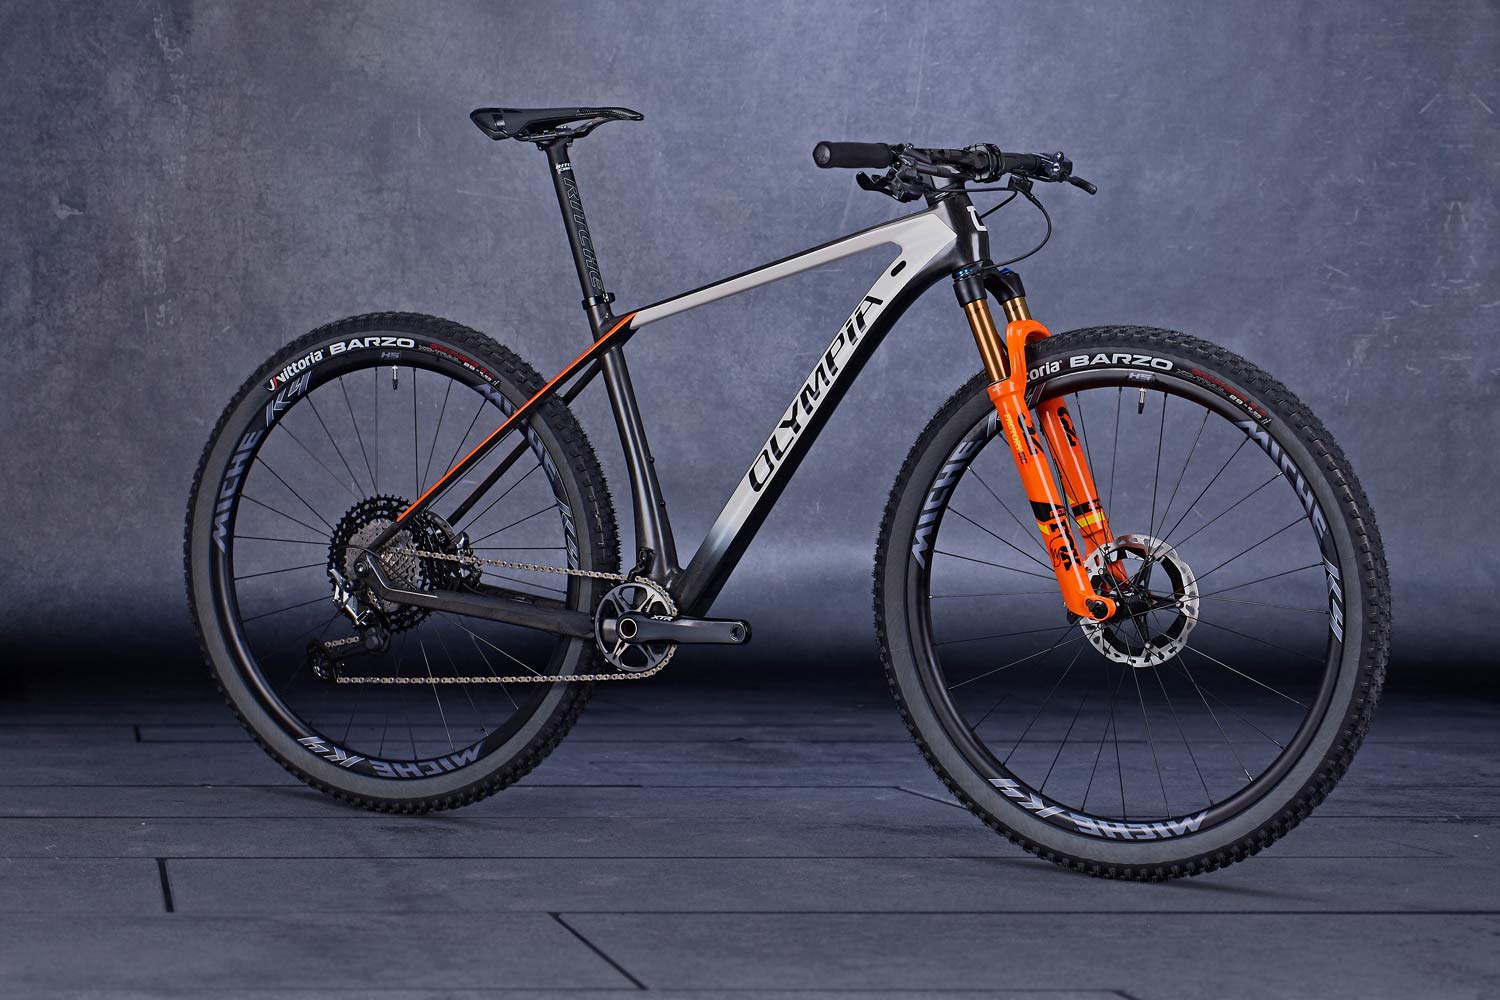 2021 Olympia F1 carbon XC hardtail reshaped to shed weight, integrate ...